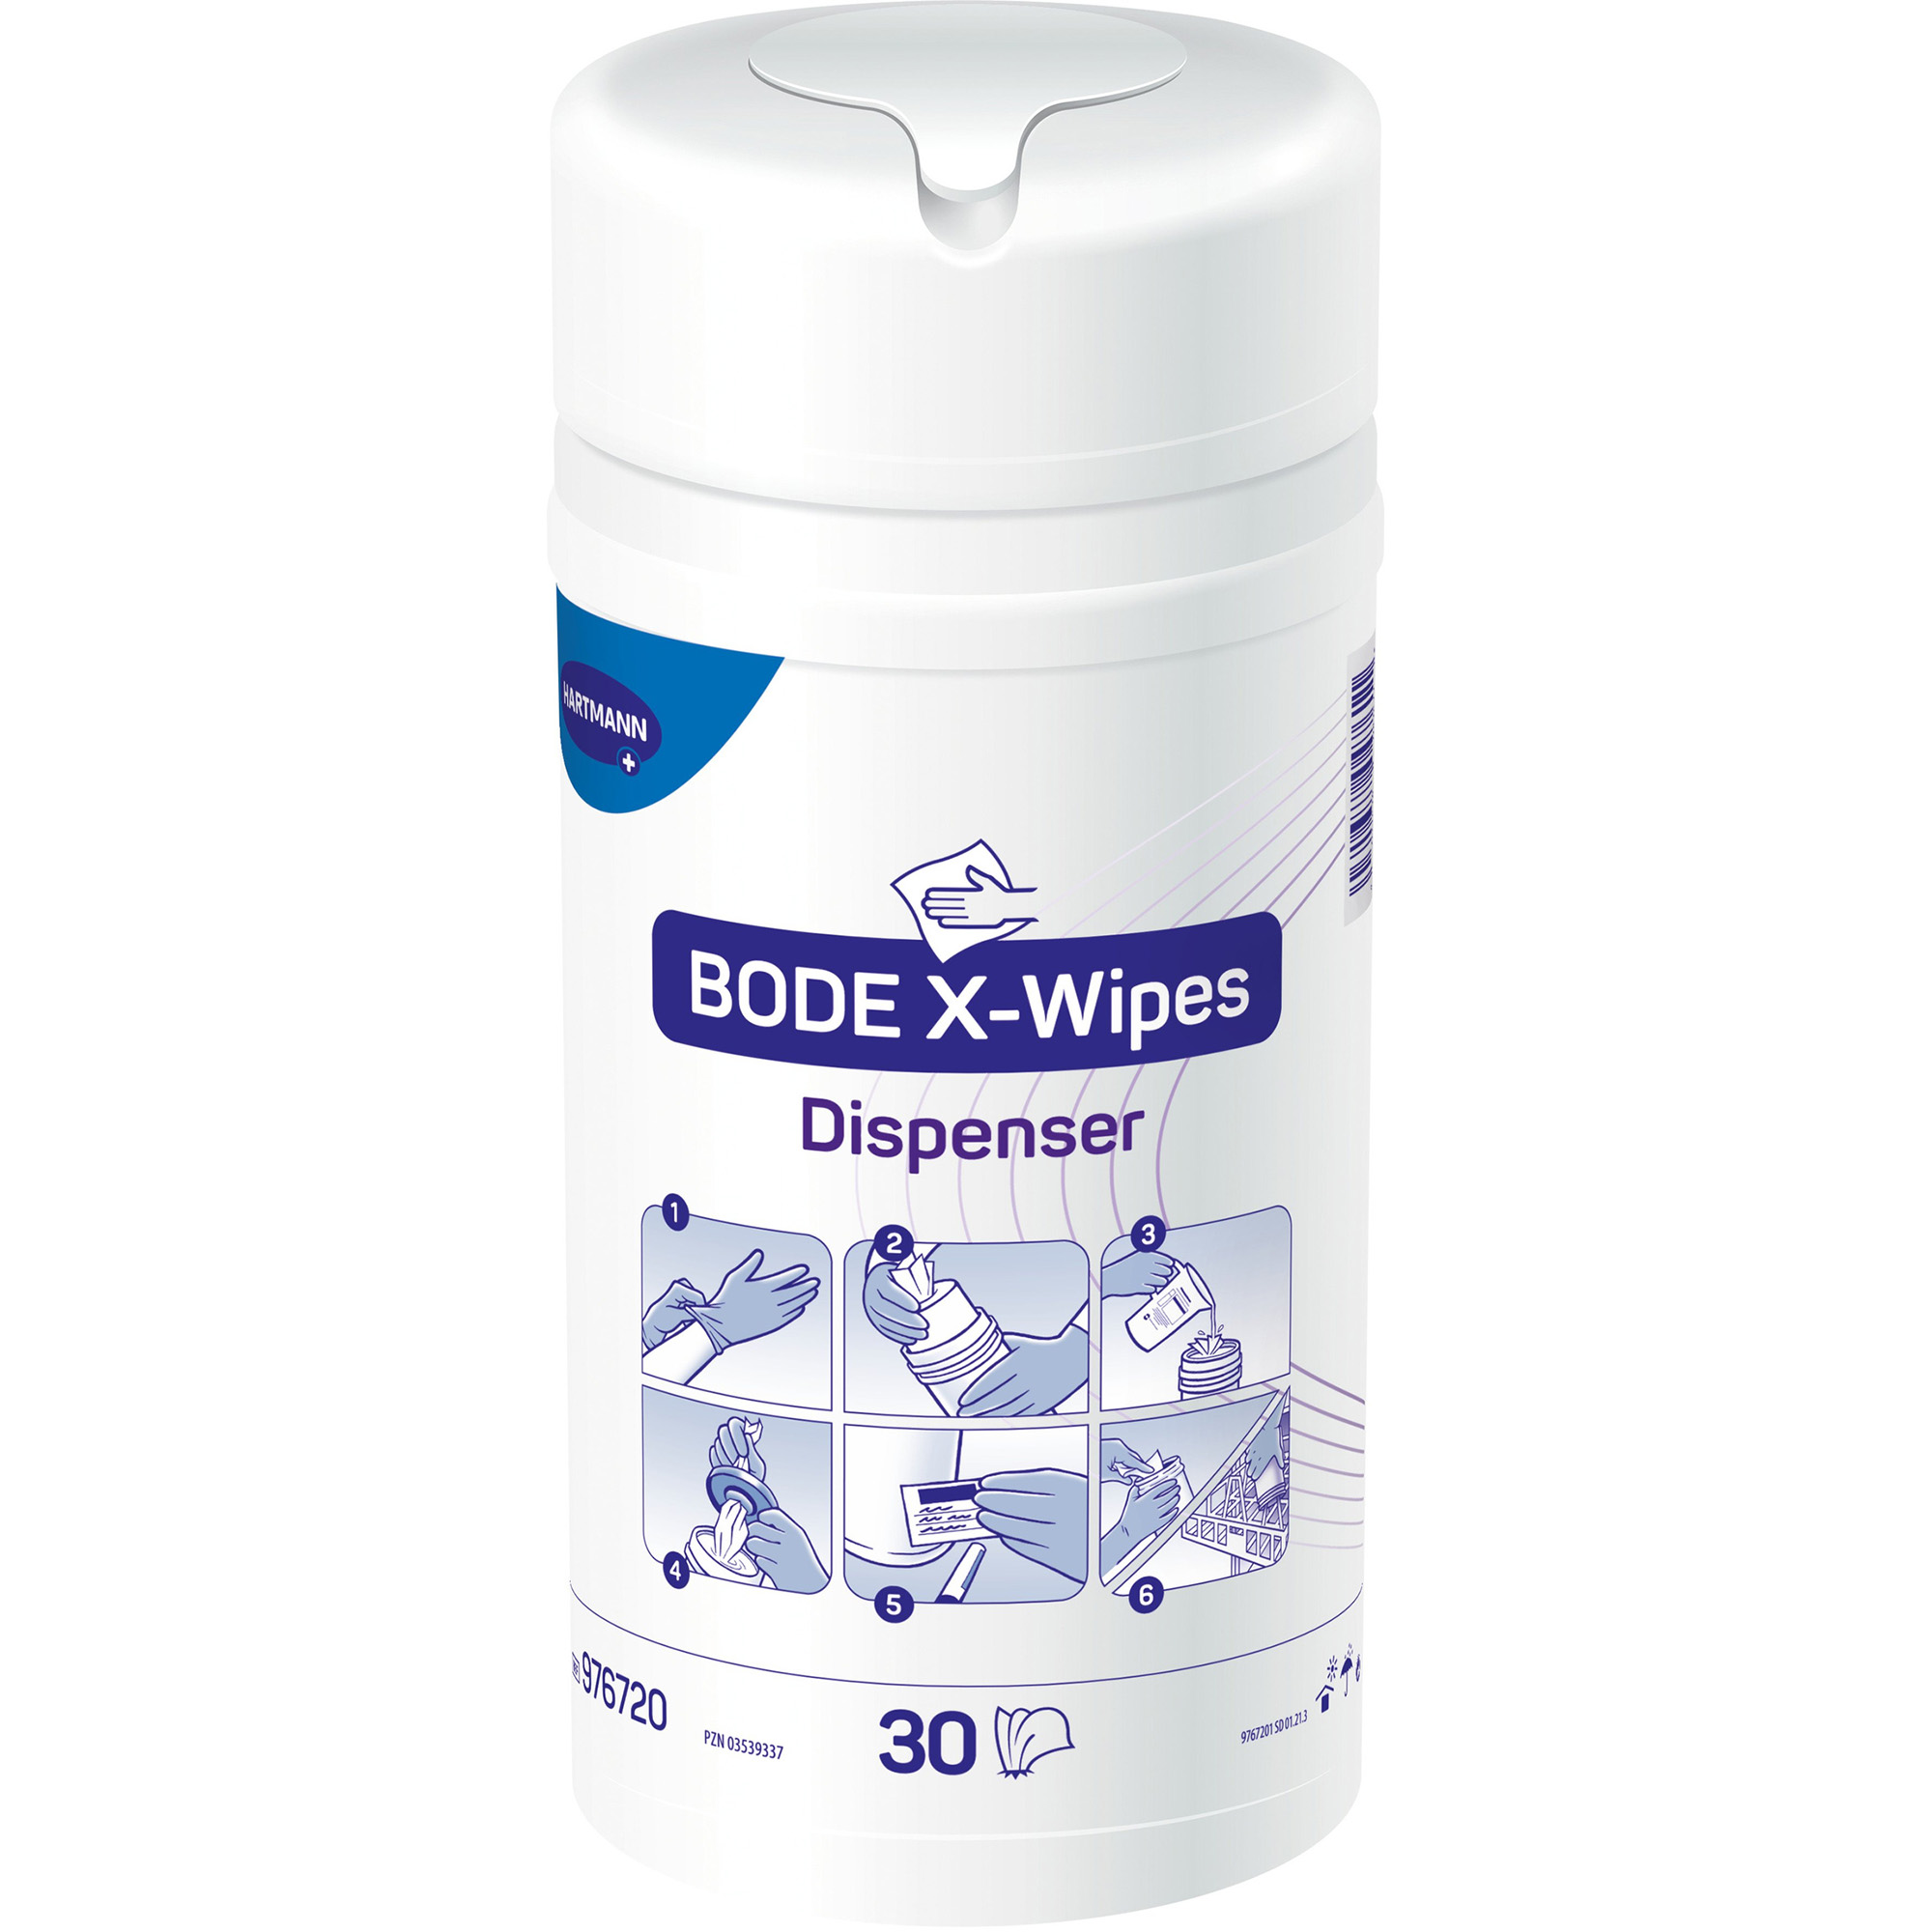 BODE X-Wipes Non-woven Rolls in foil bag, 90 wipes